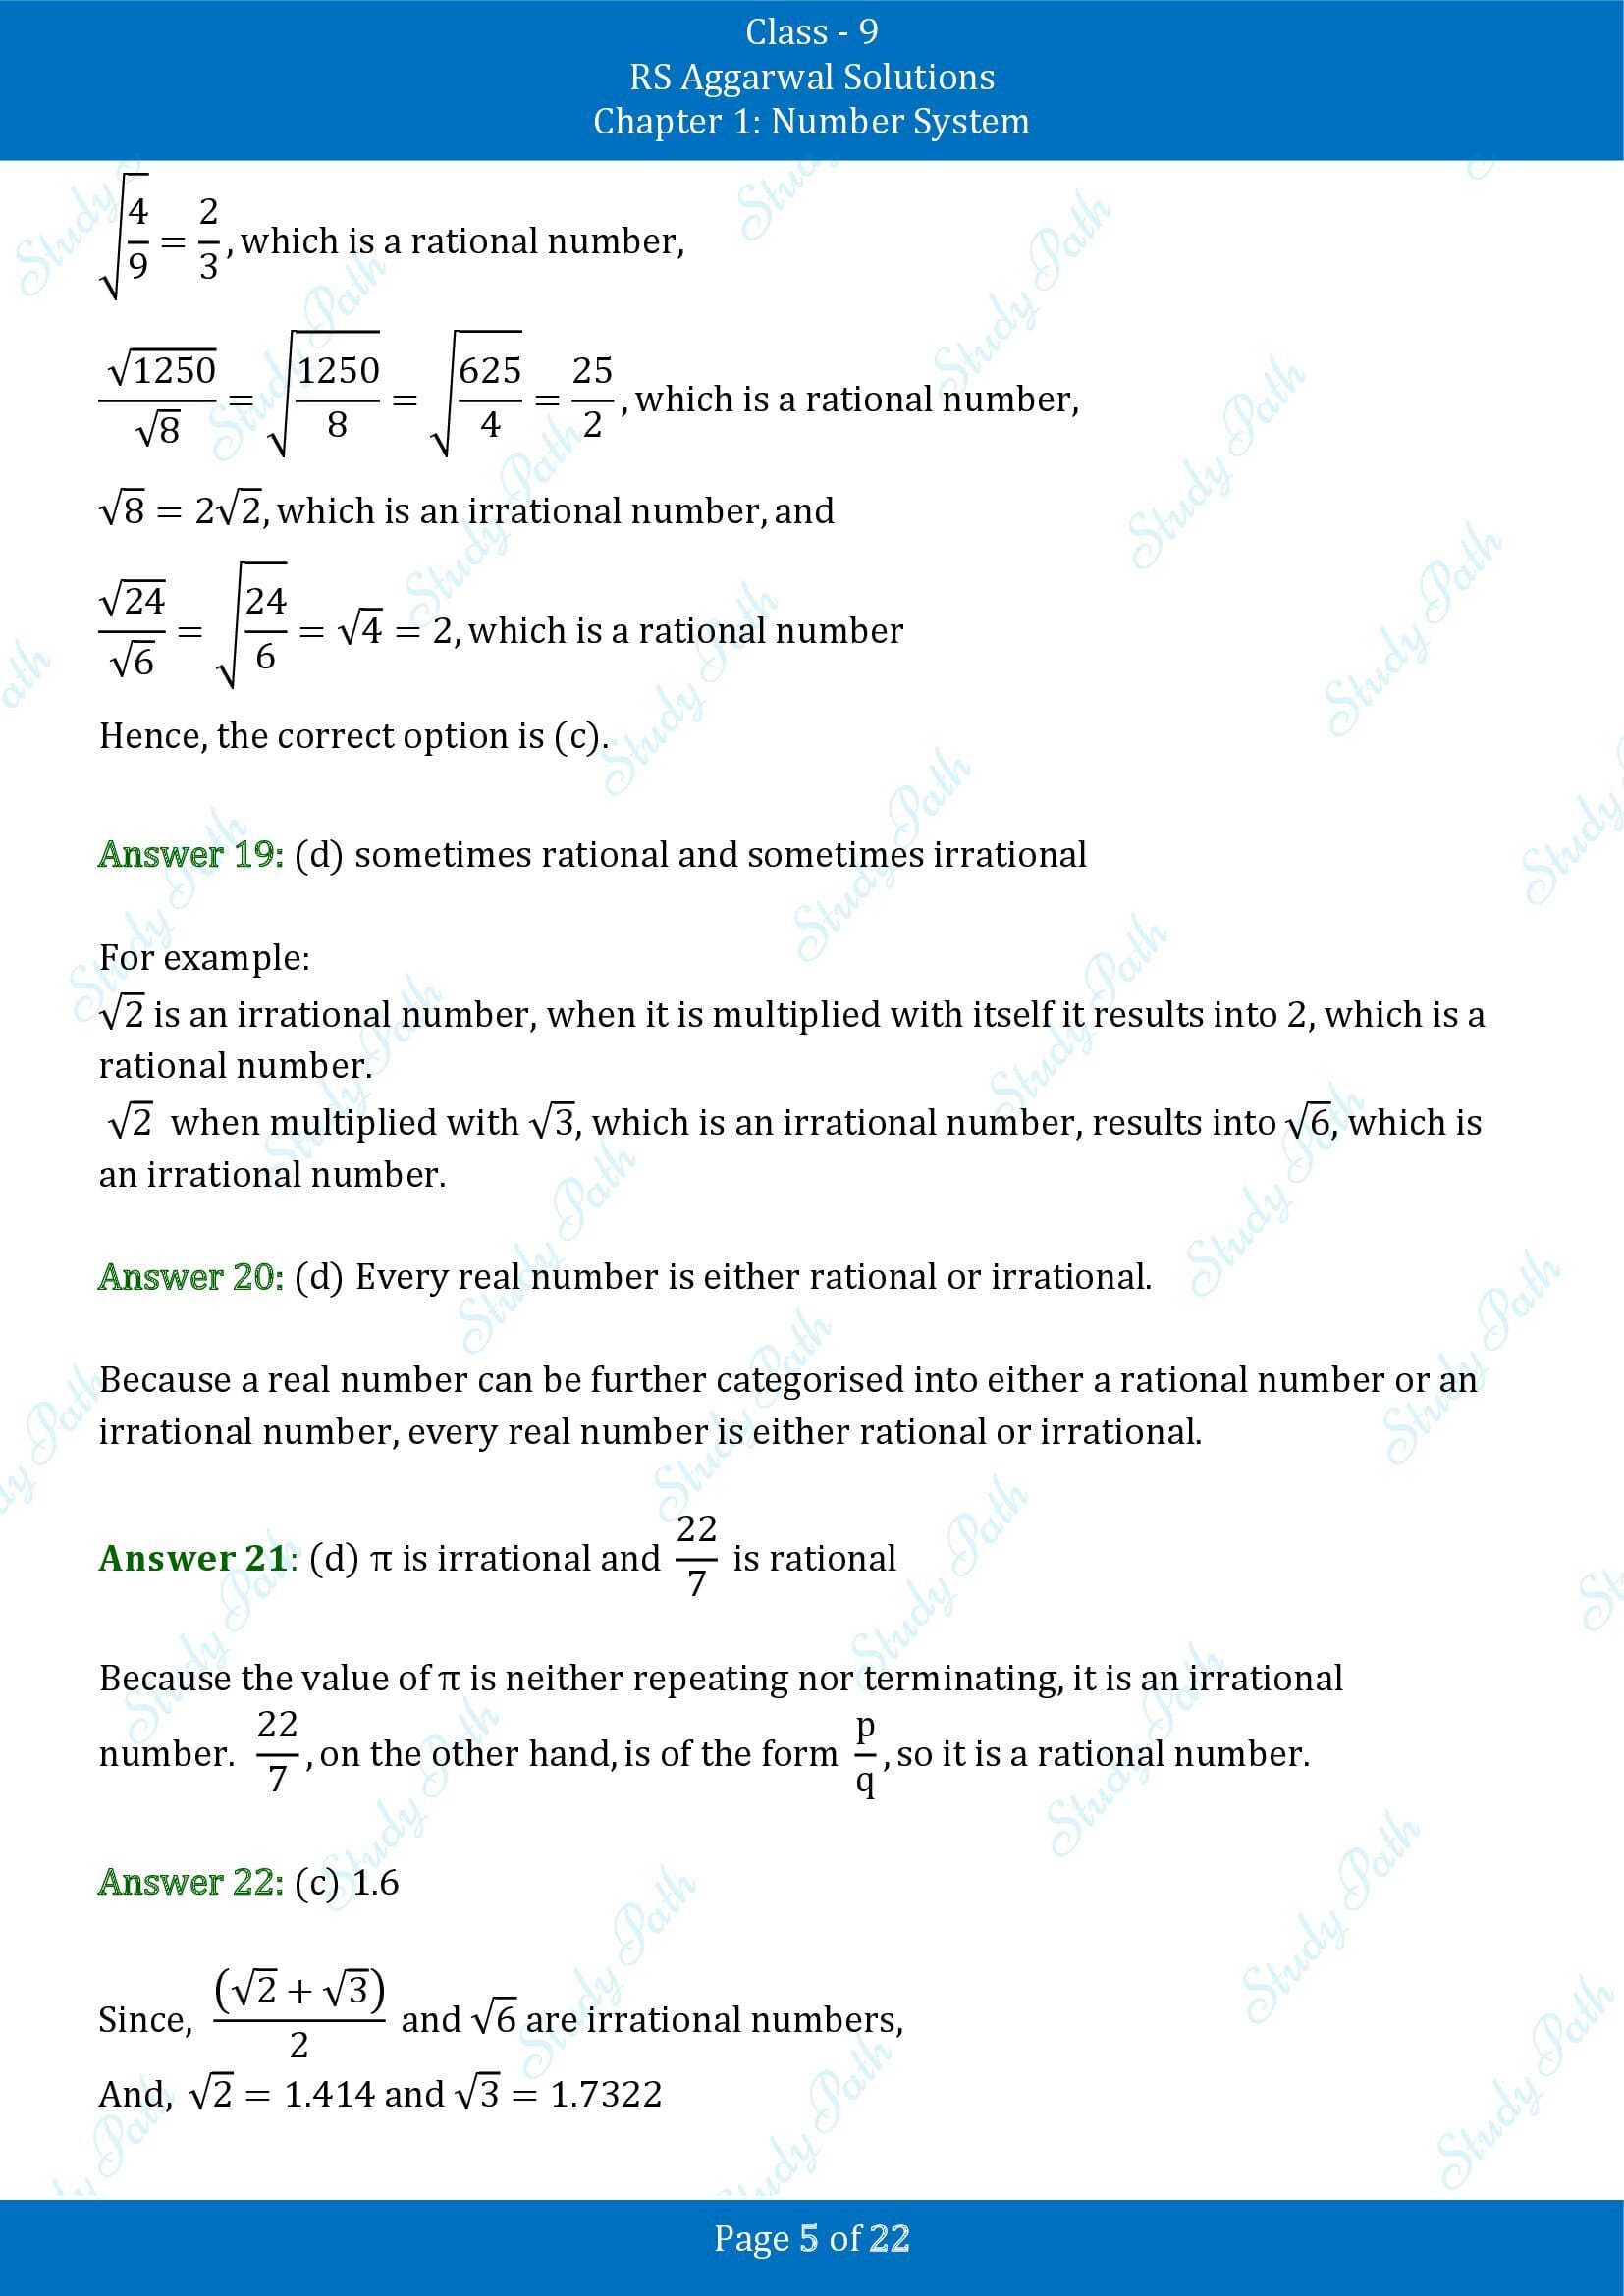 RS Aggarwal Solutions Class 9 Chapter 1 Number System Multiple Choice Questions MCQs 00005